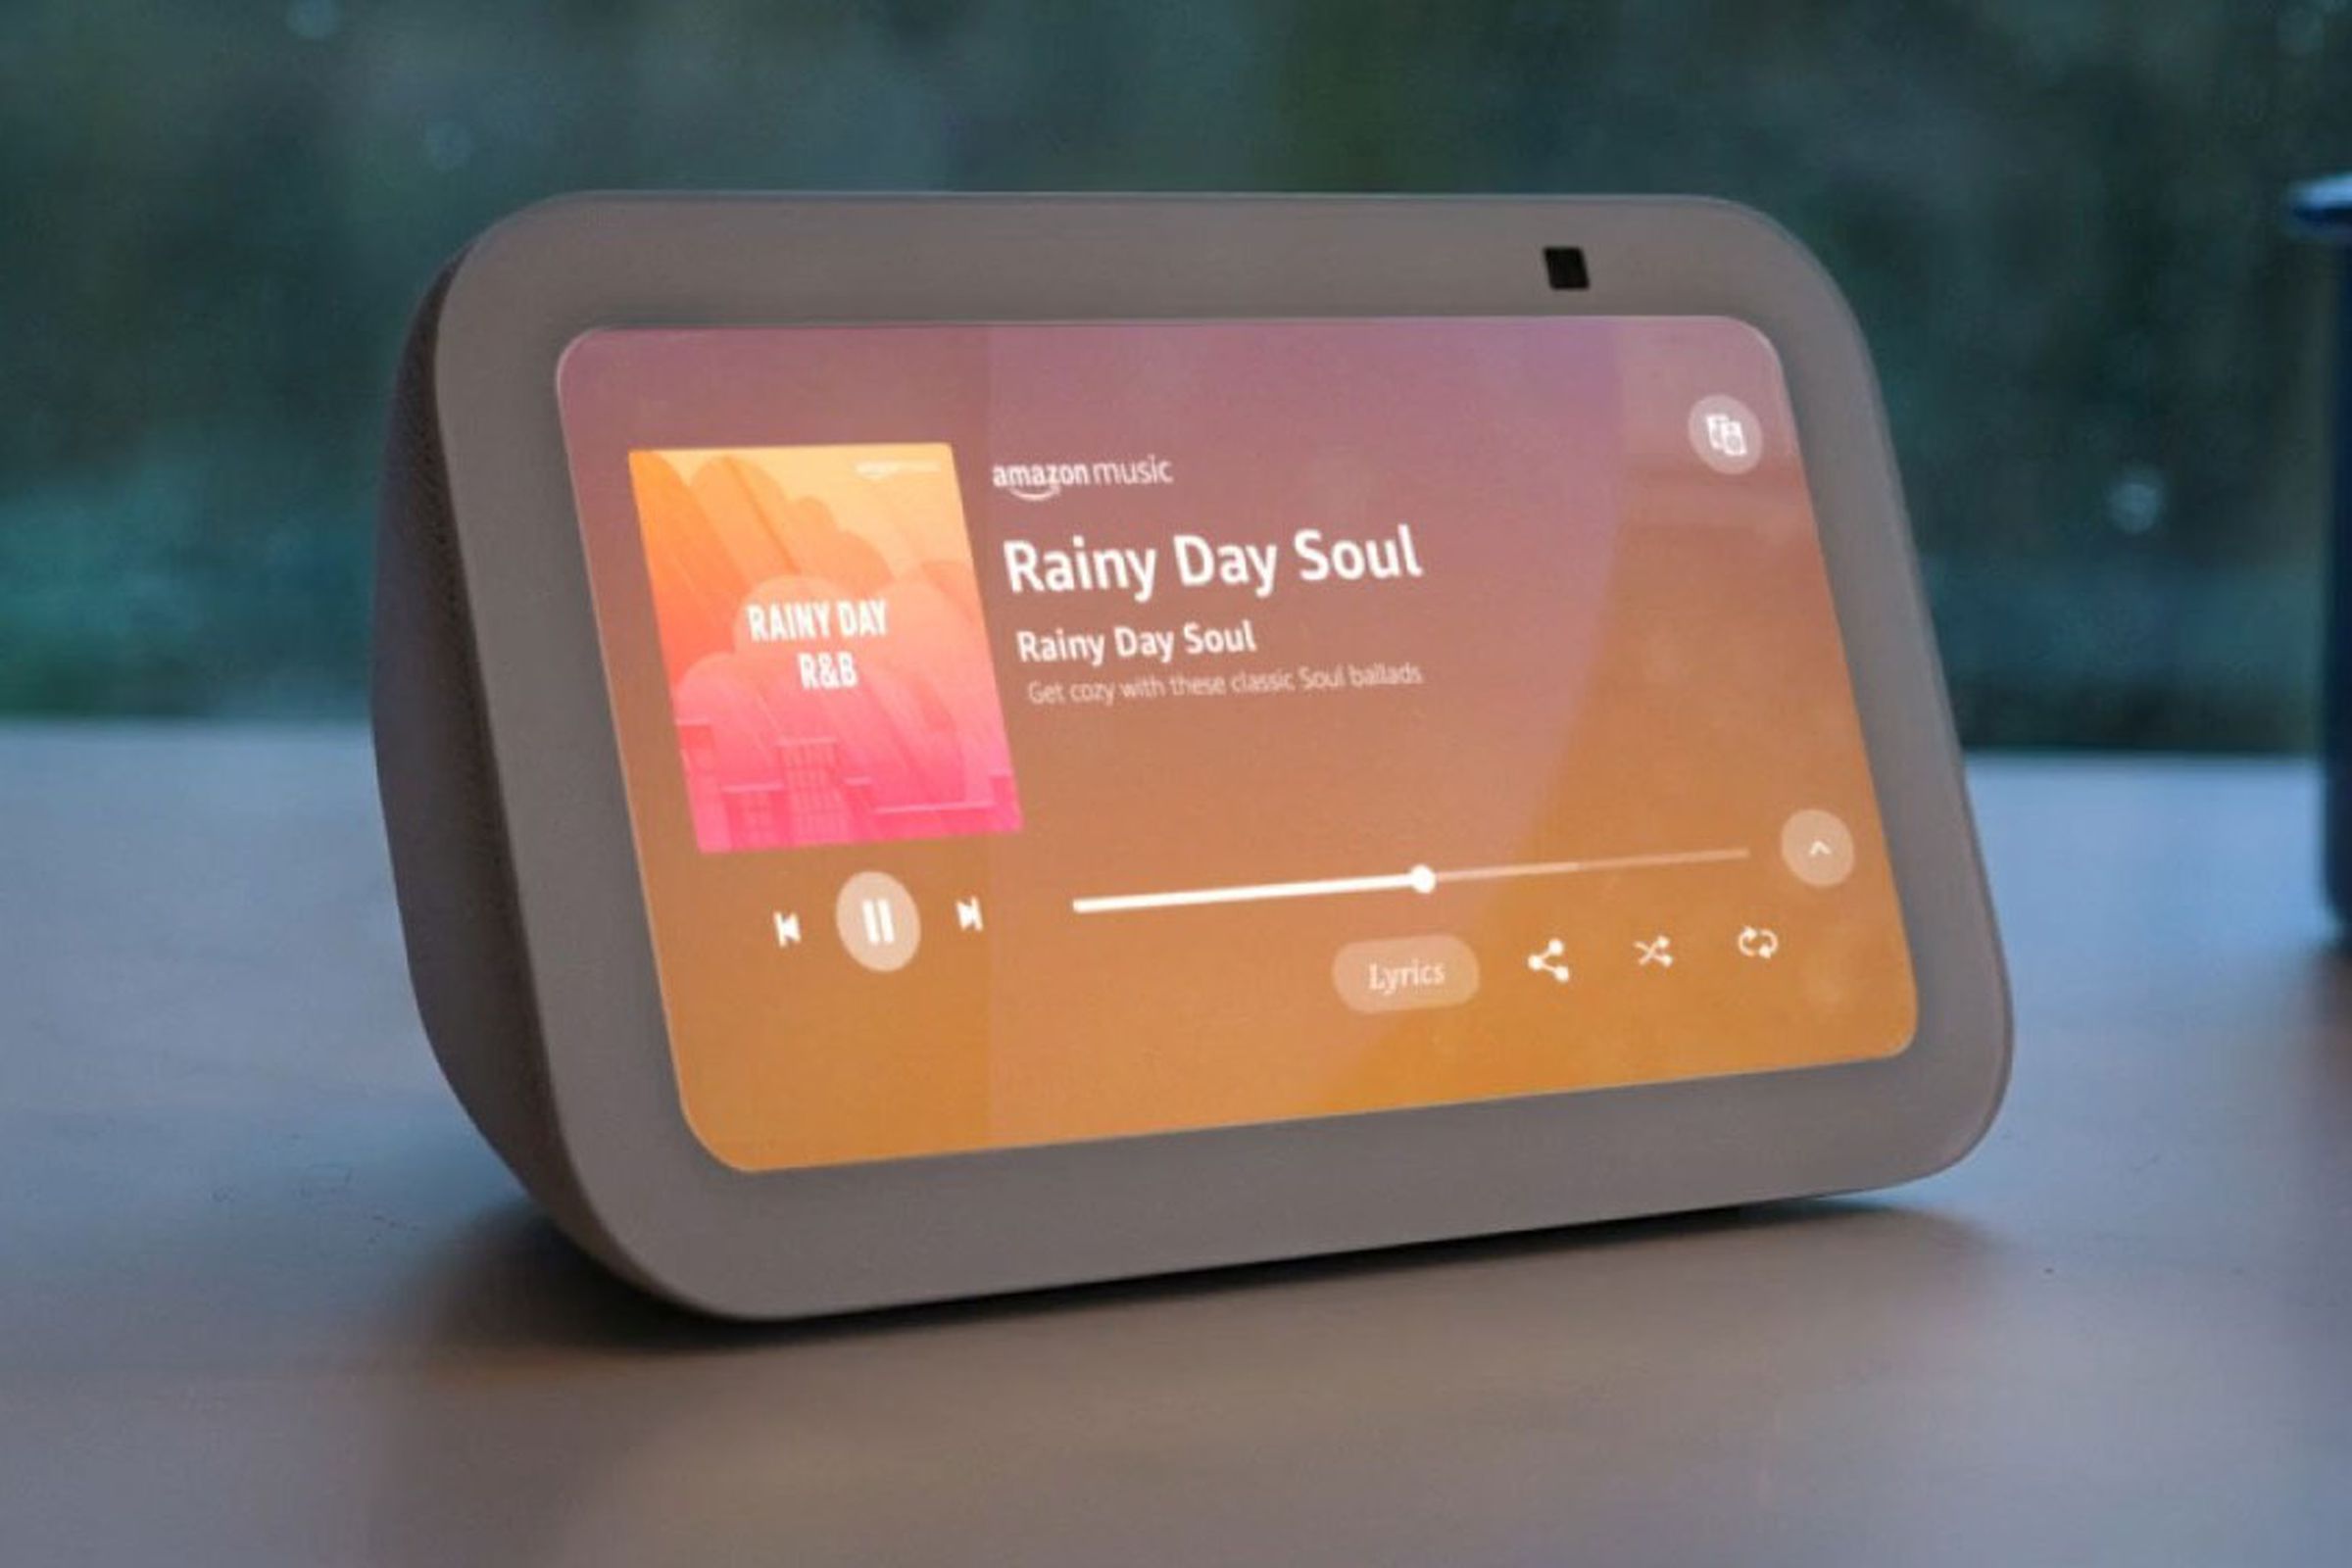 The third-gen Echo Show 5 turned on while on a desk in front of the window during a rainy day.